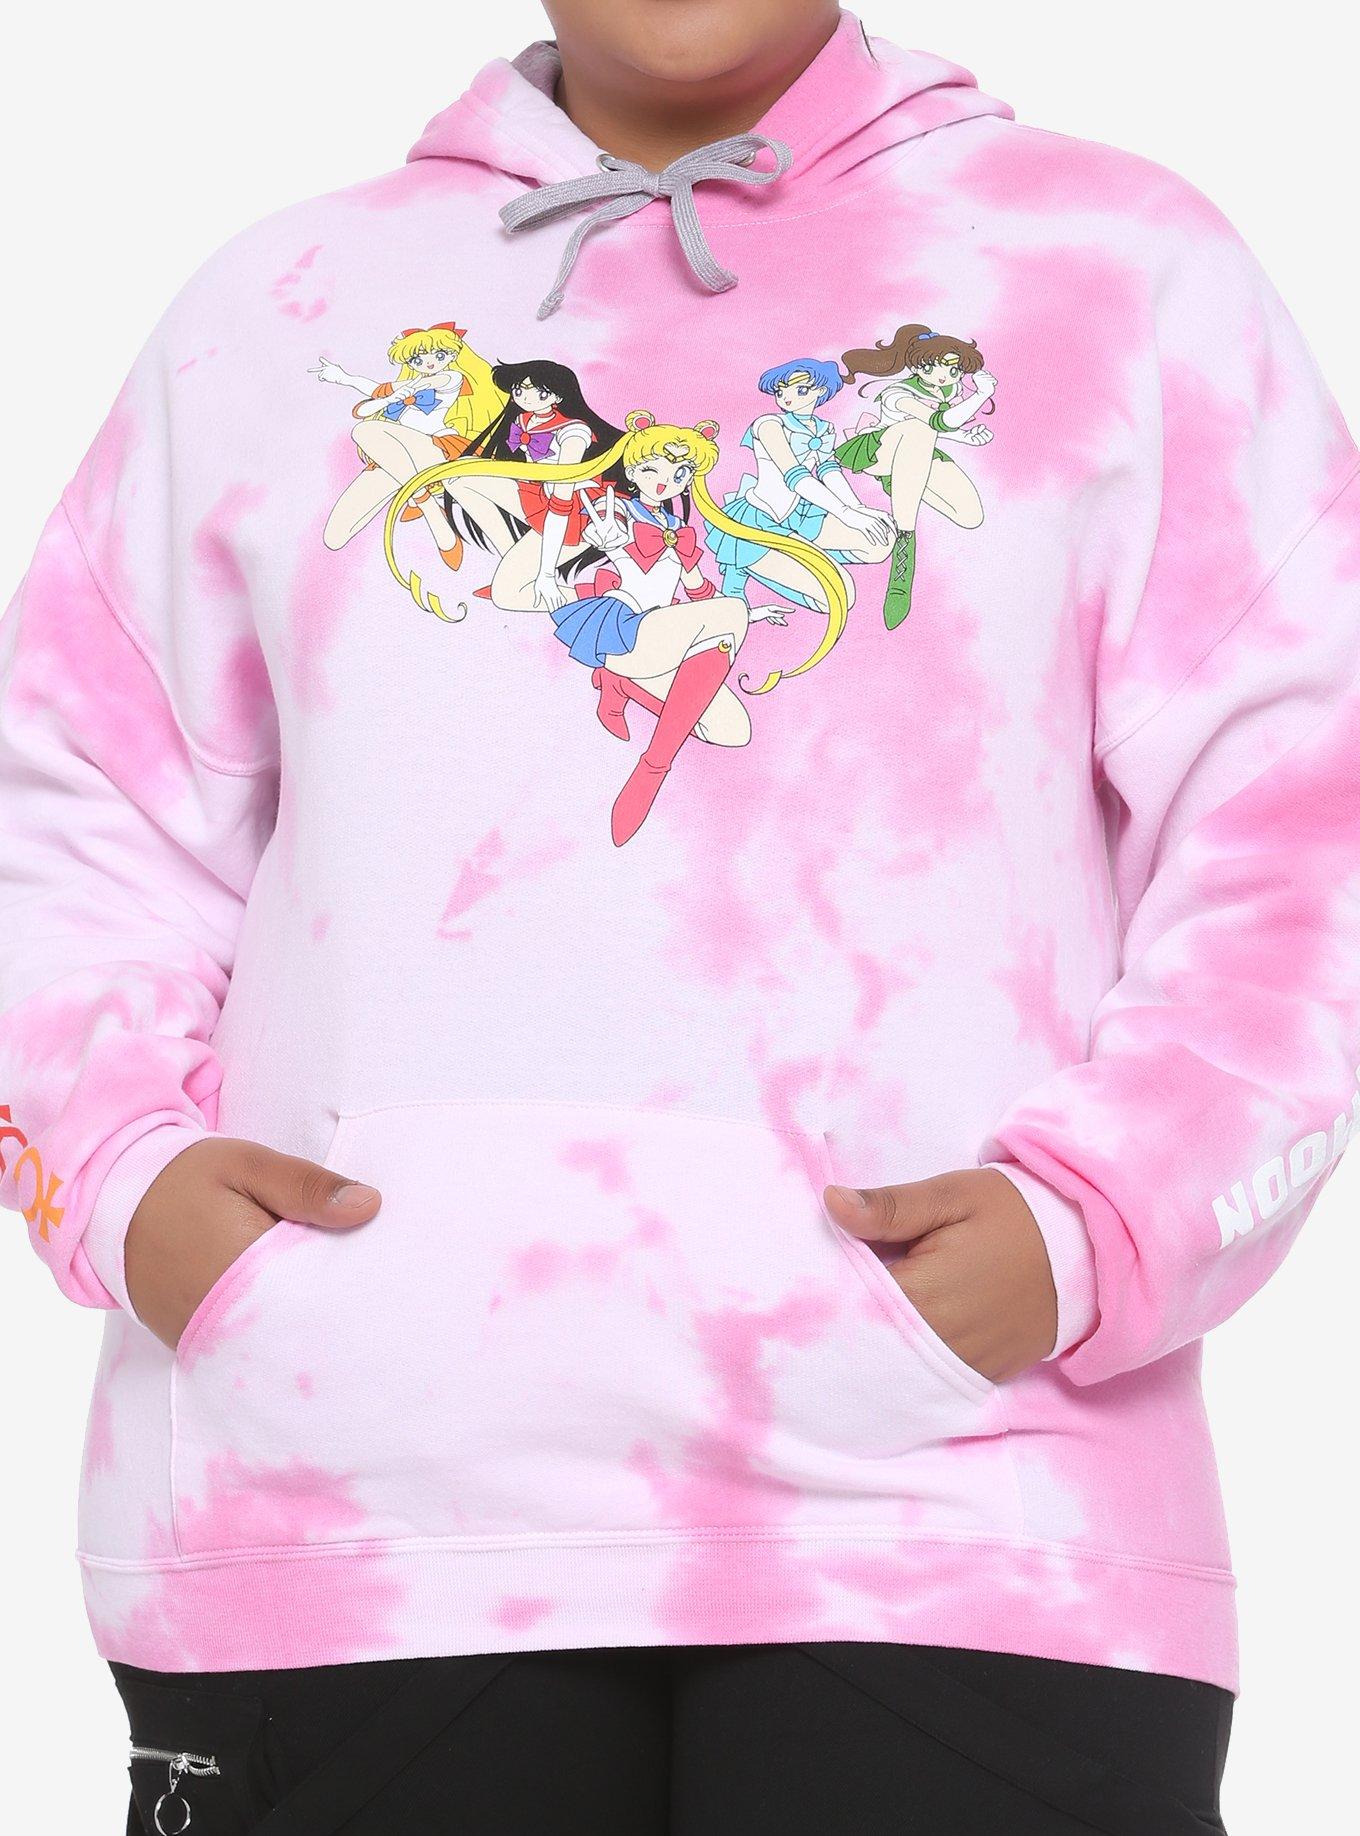 Sailor Moon Group Pink & White Tie-Dye Girls Hoodie Plus Size | Hot Topic